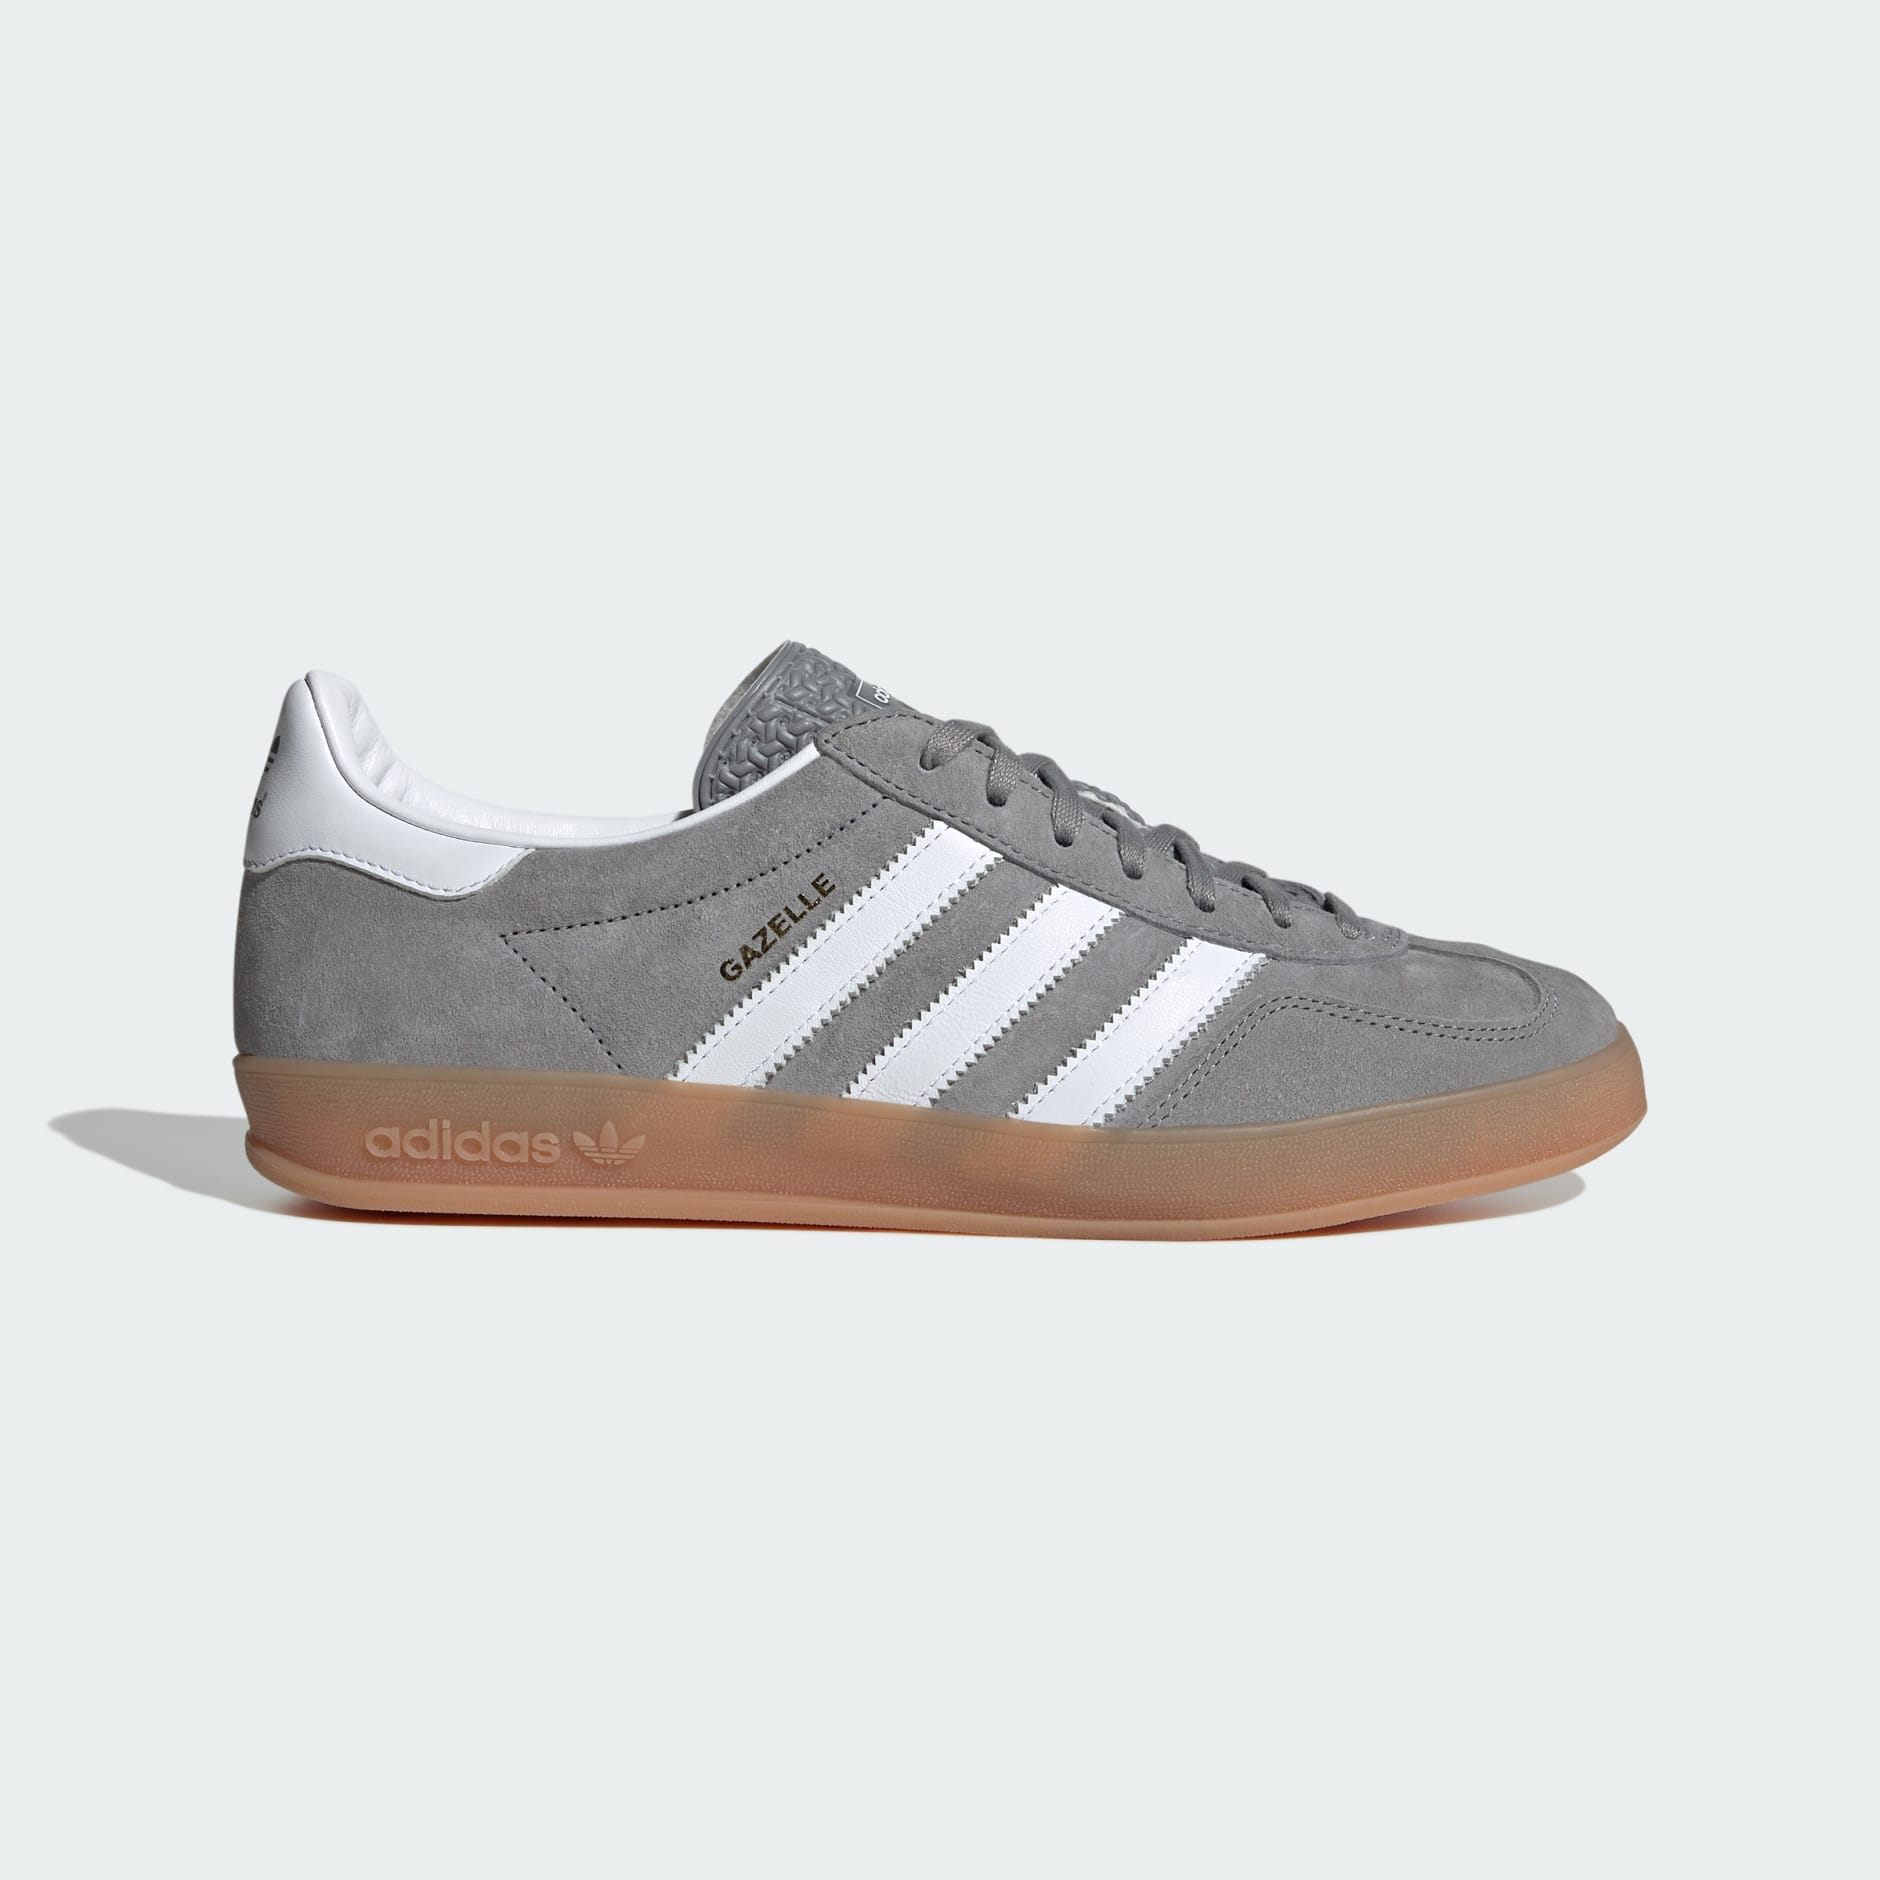 Affordable Sneakers You'll Love : The Adidas Samba Gazelle Indoor 